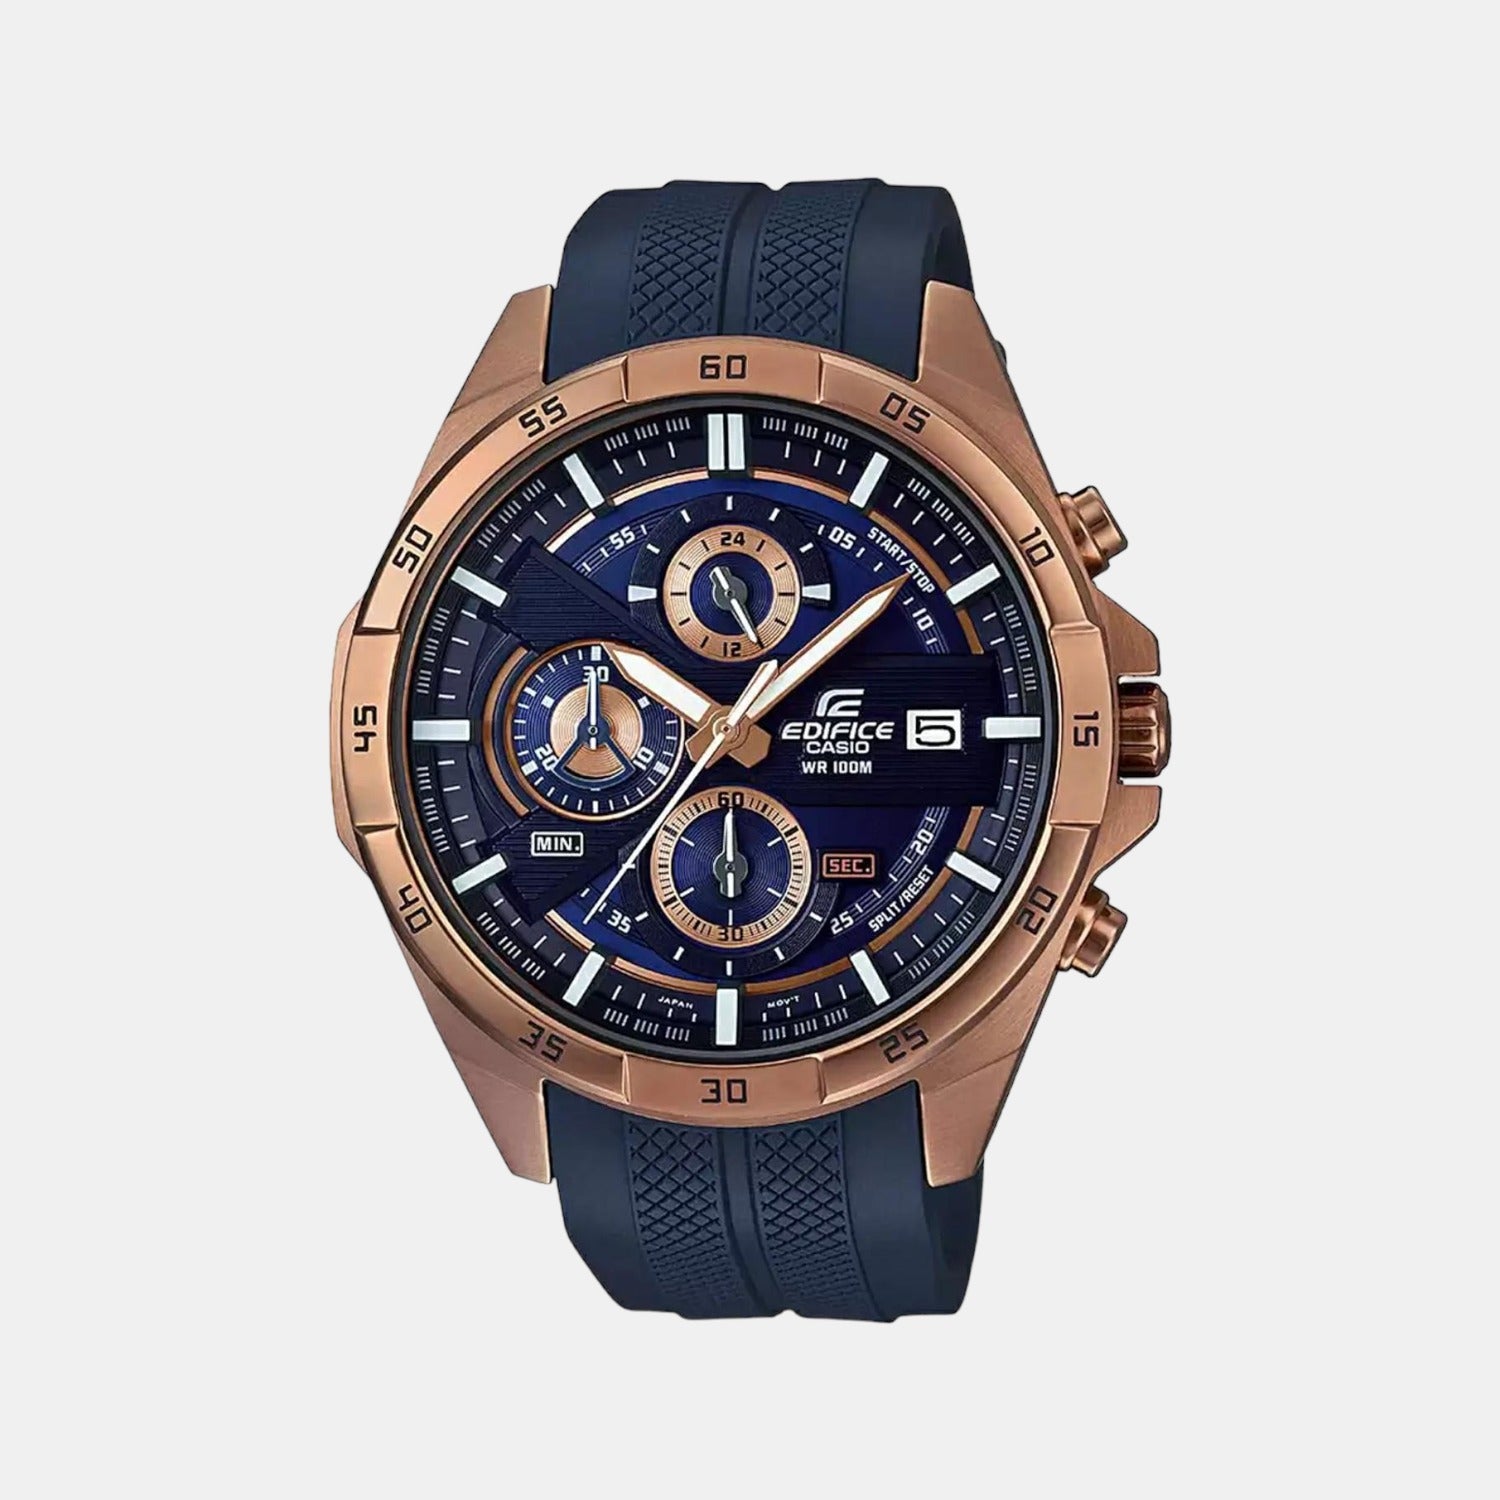 Casio Edifice EX176 Men's Watch in Gurgaon at best price by Casio Watch  Exclusive Store - Justdial